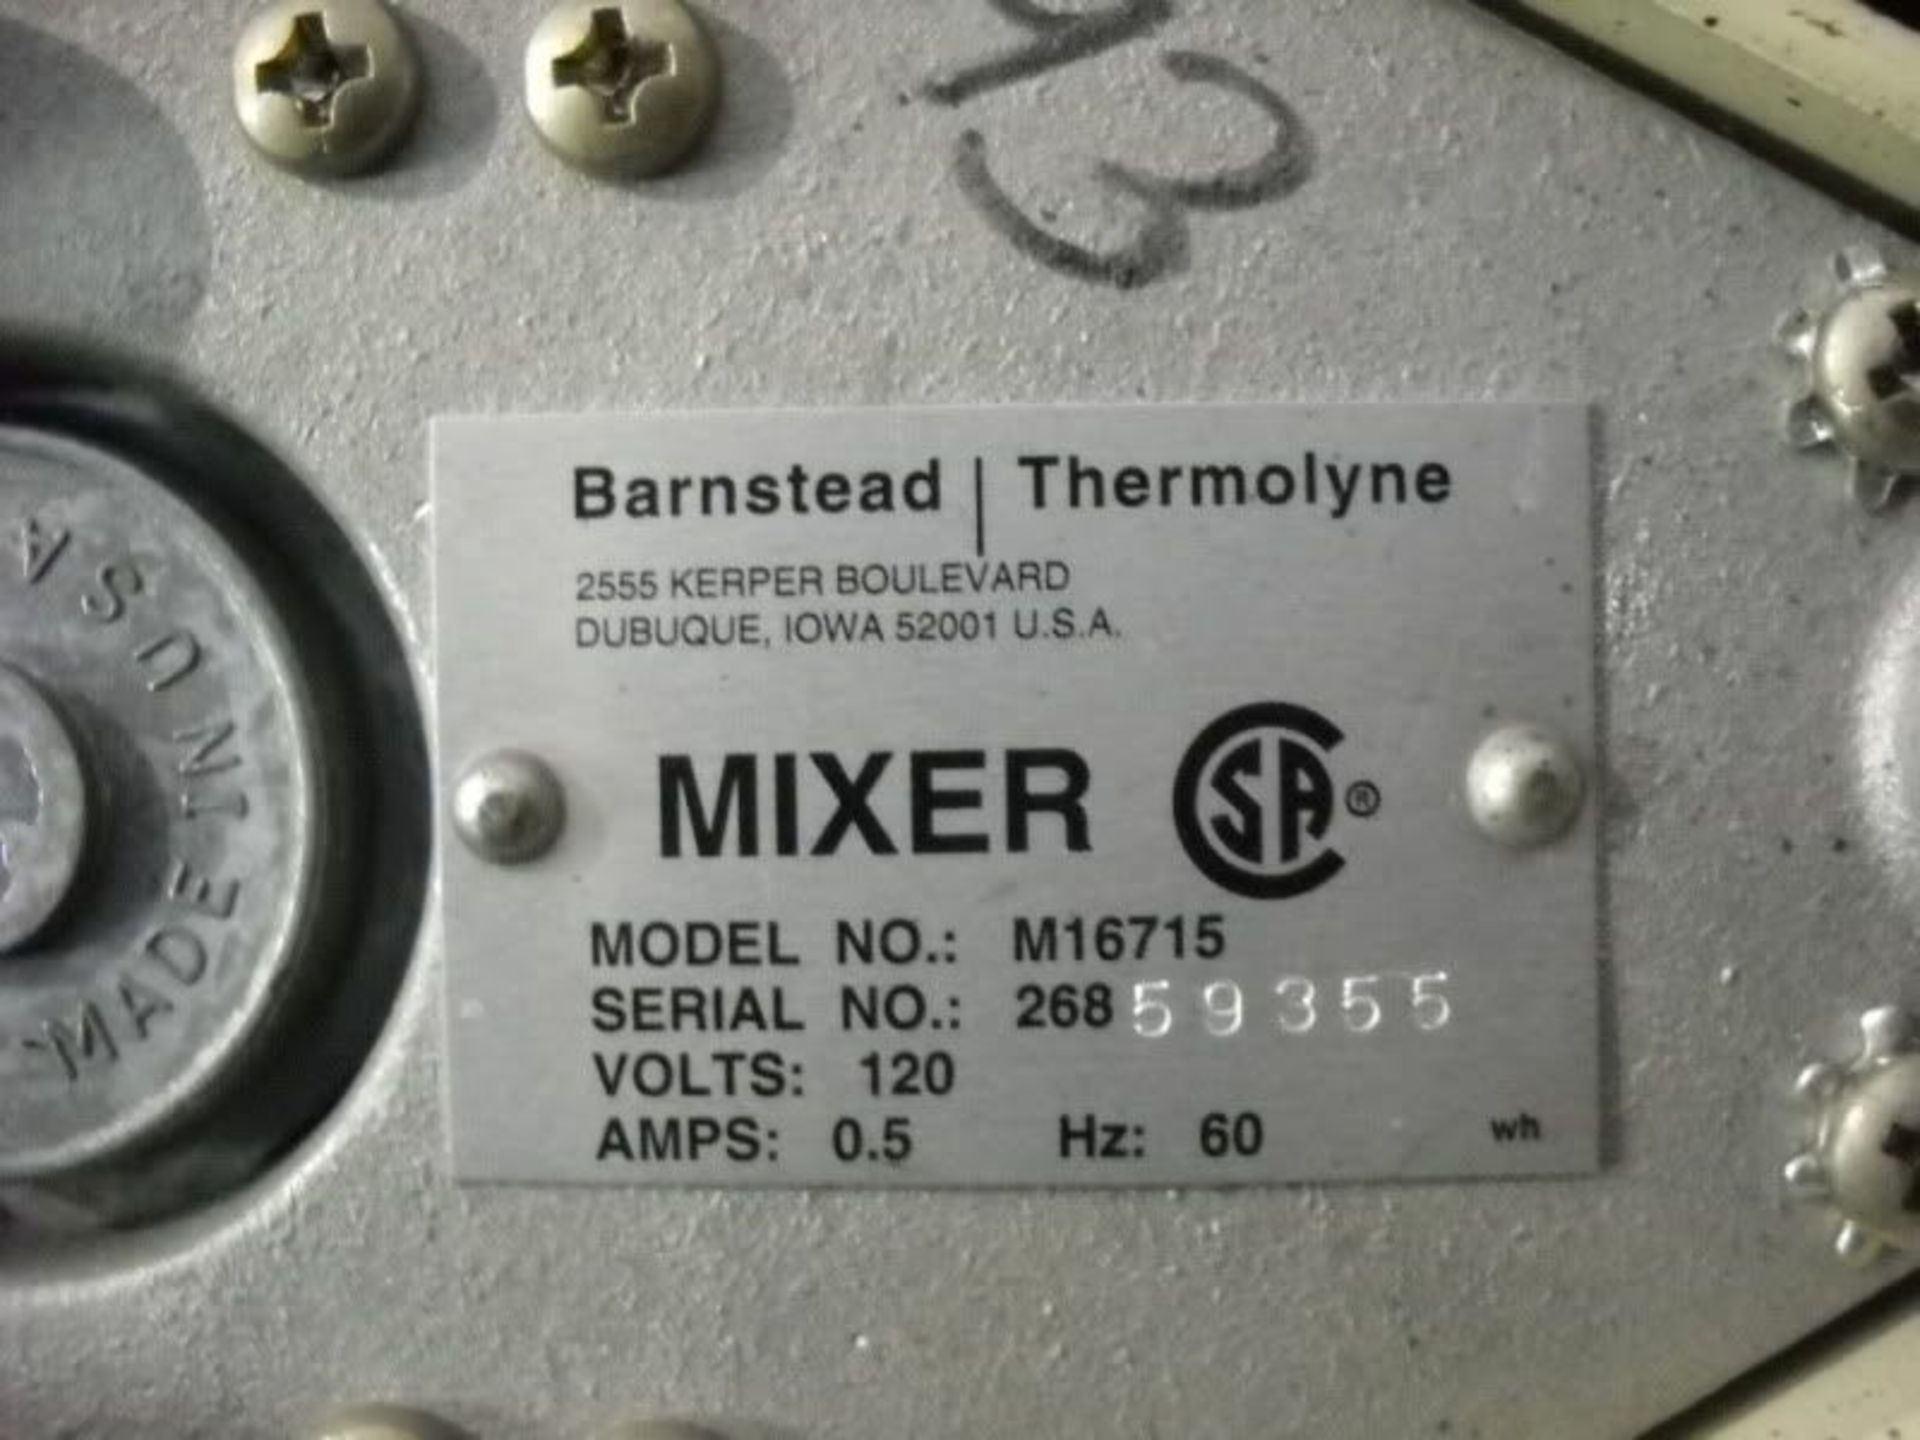 Barnstead Thermolyne Maxi Mixer Vortexer Shaker Model 16715, Qty 1, 221113336586 - Image 5 of 5